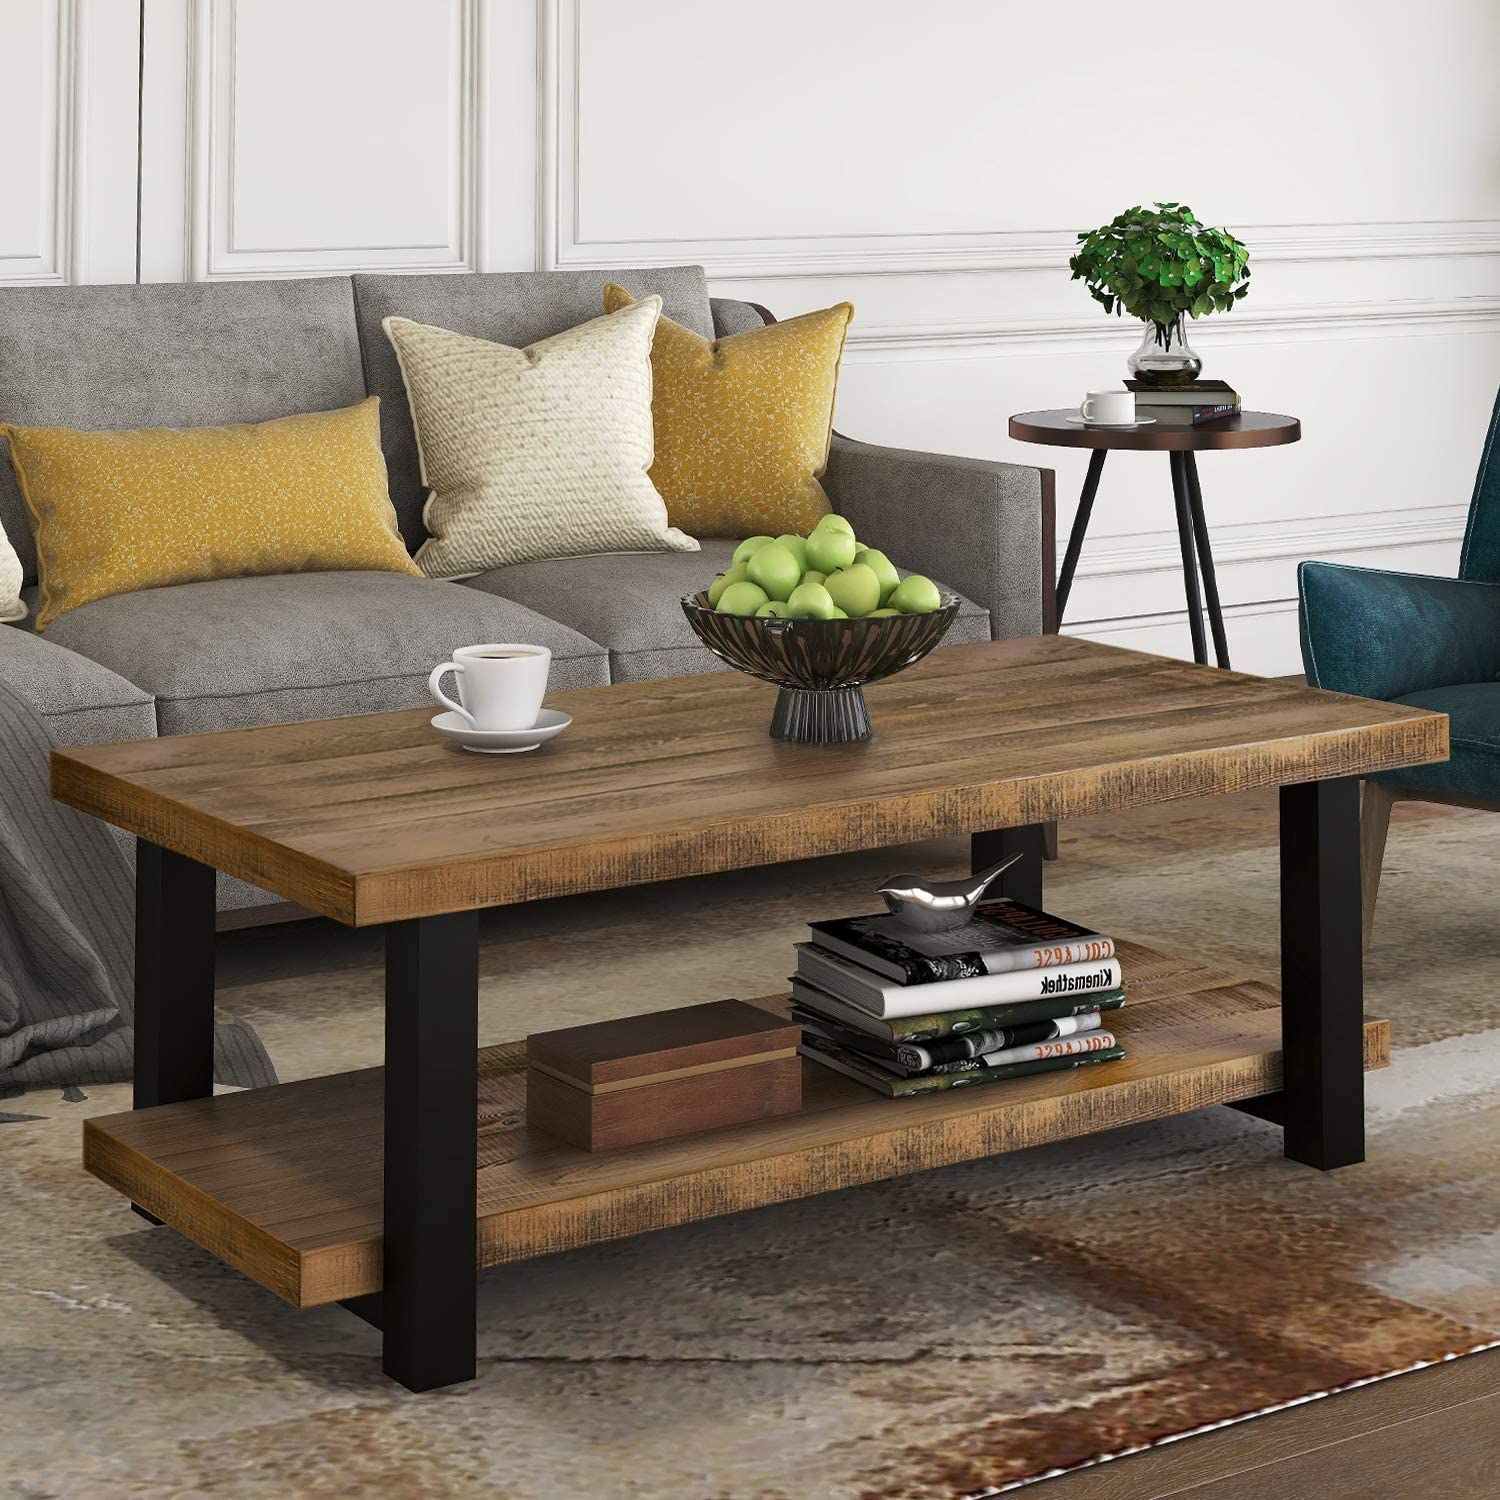 Choose The Perfect Style Coffee Table To Compliment Your Home – Coffee In Waterproof Coffee Tables (Gallery 15 of 21)